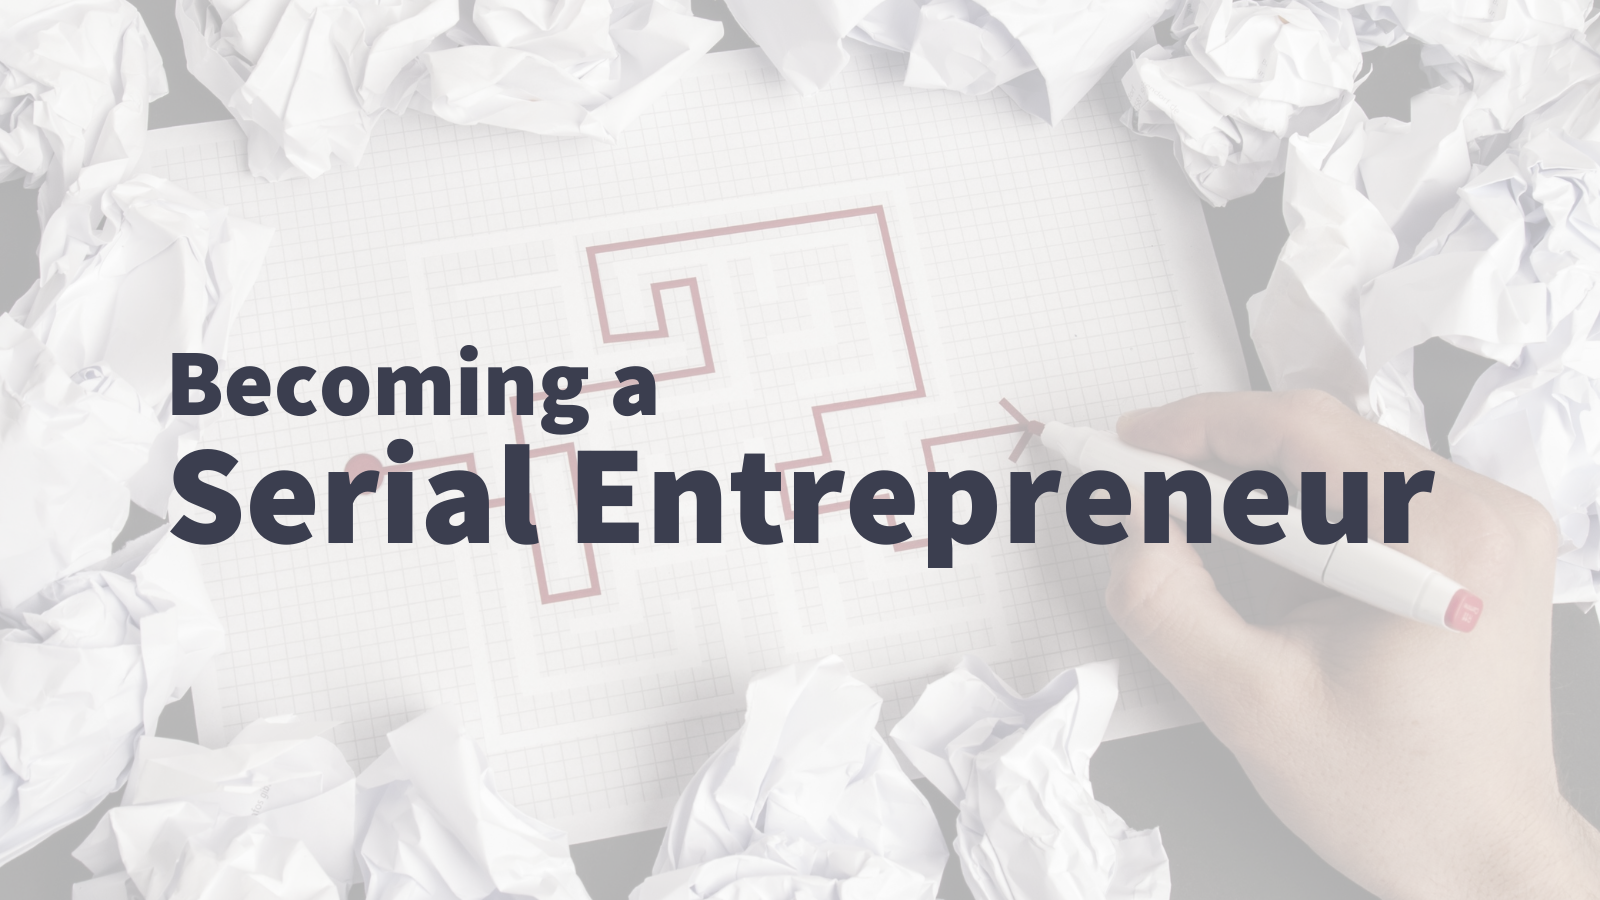 What Does It Take to Become a Serial Entrepreneur?